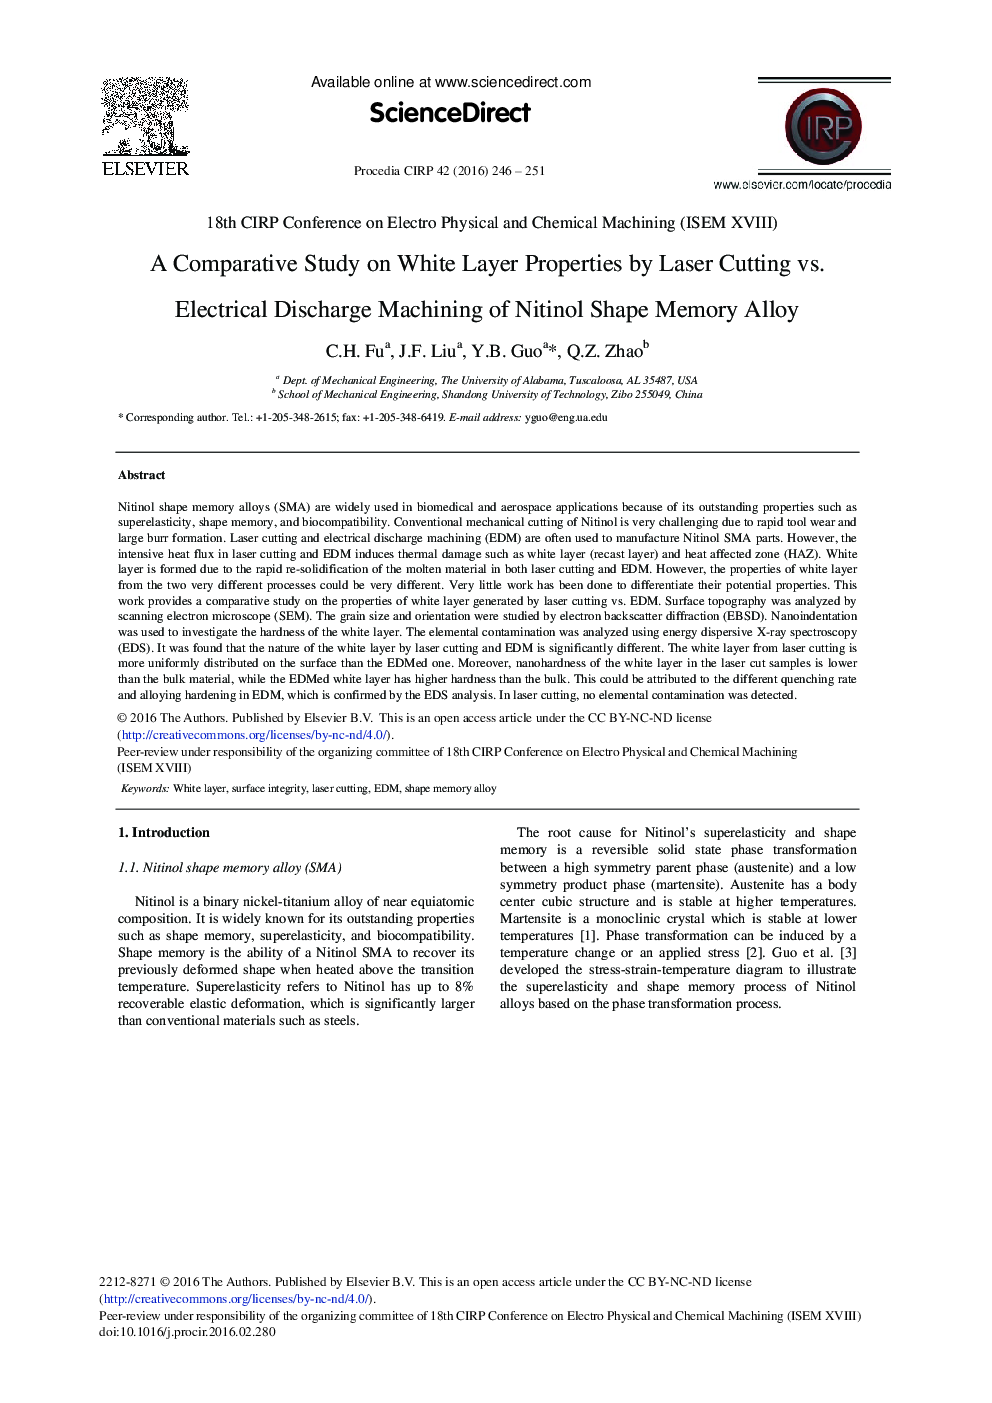 A Comparative Study on White Layer Properties by Laser Cutting vs. Electrical Discharge Machining of Nitinol Shape Memory Alloy 